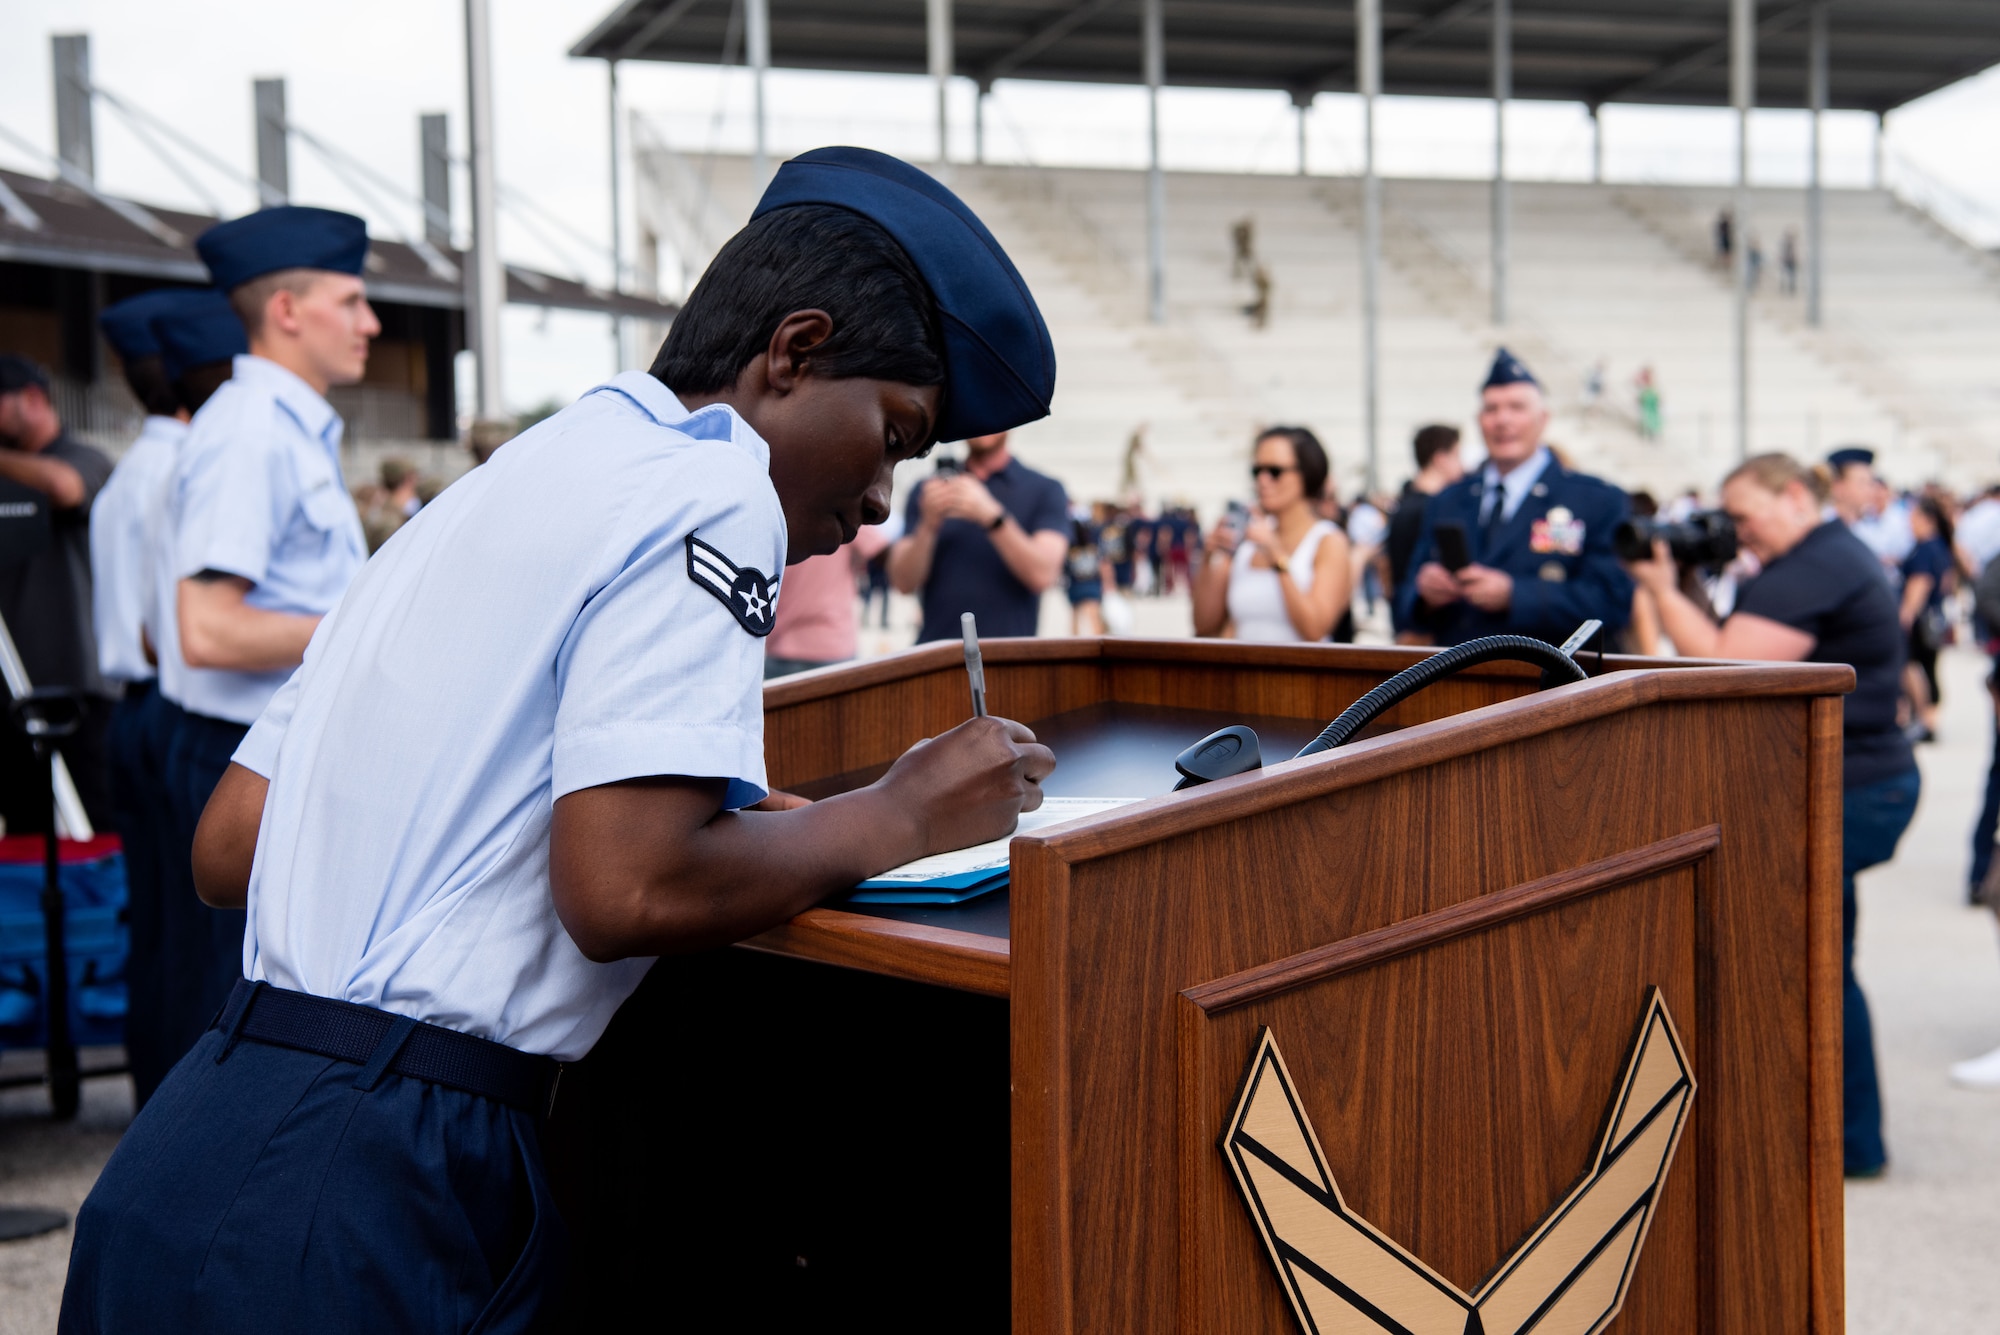 Airman First Class D'elbrah Assamoi from Cote D’Ivoire signs her U.S. Certificate of Citizenship after the Basic Military Training Coin Ceremony at JBSA-Lackland, April 26, 2023. Fourteen Airmen became the first U.S. citizens here under the new streamlined Naturalization Process at BMT. The Airmen were part of approximately 500 trainees from the 326th Training Squadron who graduated this week. The process is part of an effort to revive the naturalization path for immigrants and allow trainees to become citizens before they graduate. It’s just one of several initiatives the Air Force is taking to remove barriers to service amid the current challenging recruiting environment. (U.S. Air Force photo by Vanessa R. Adame)